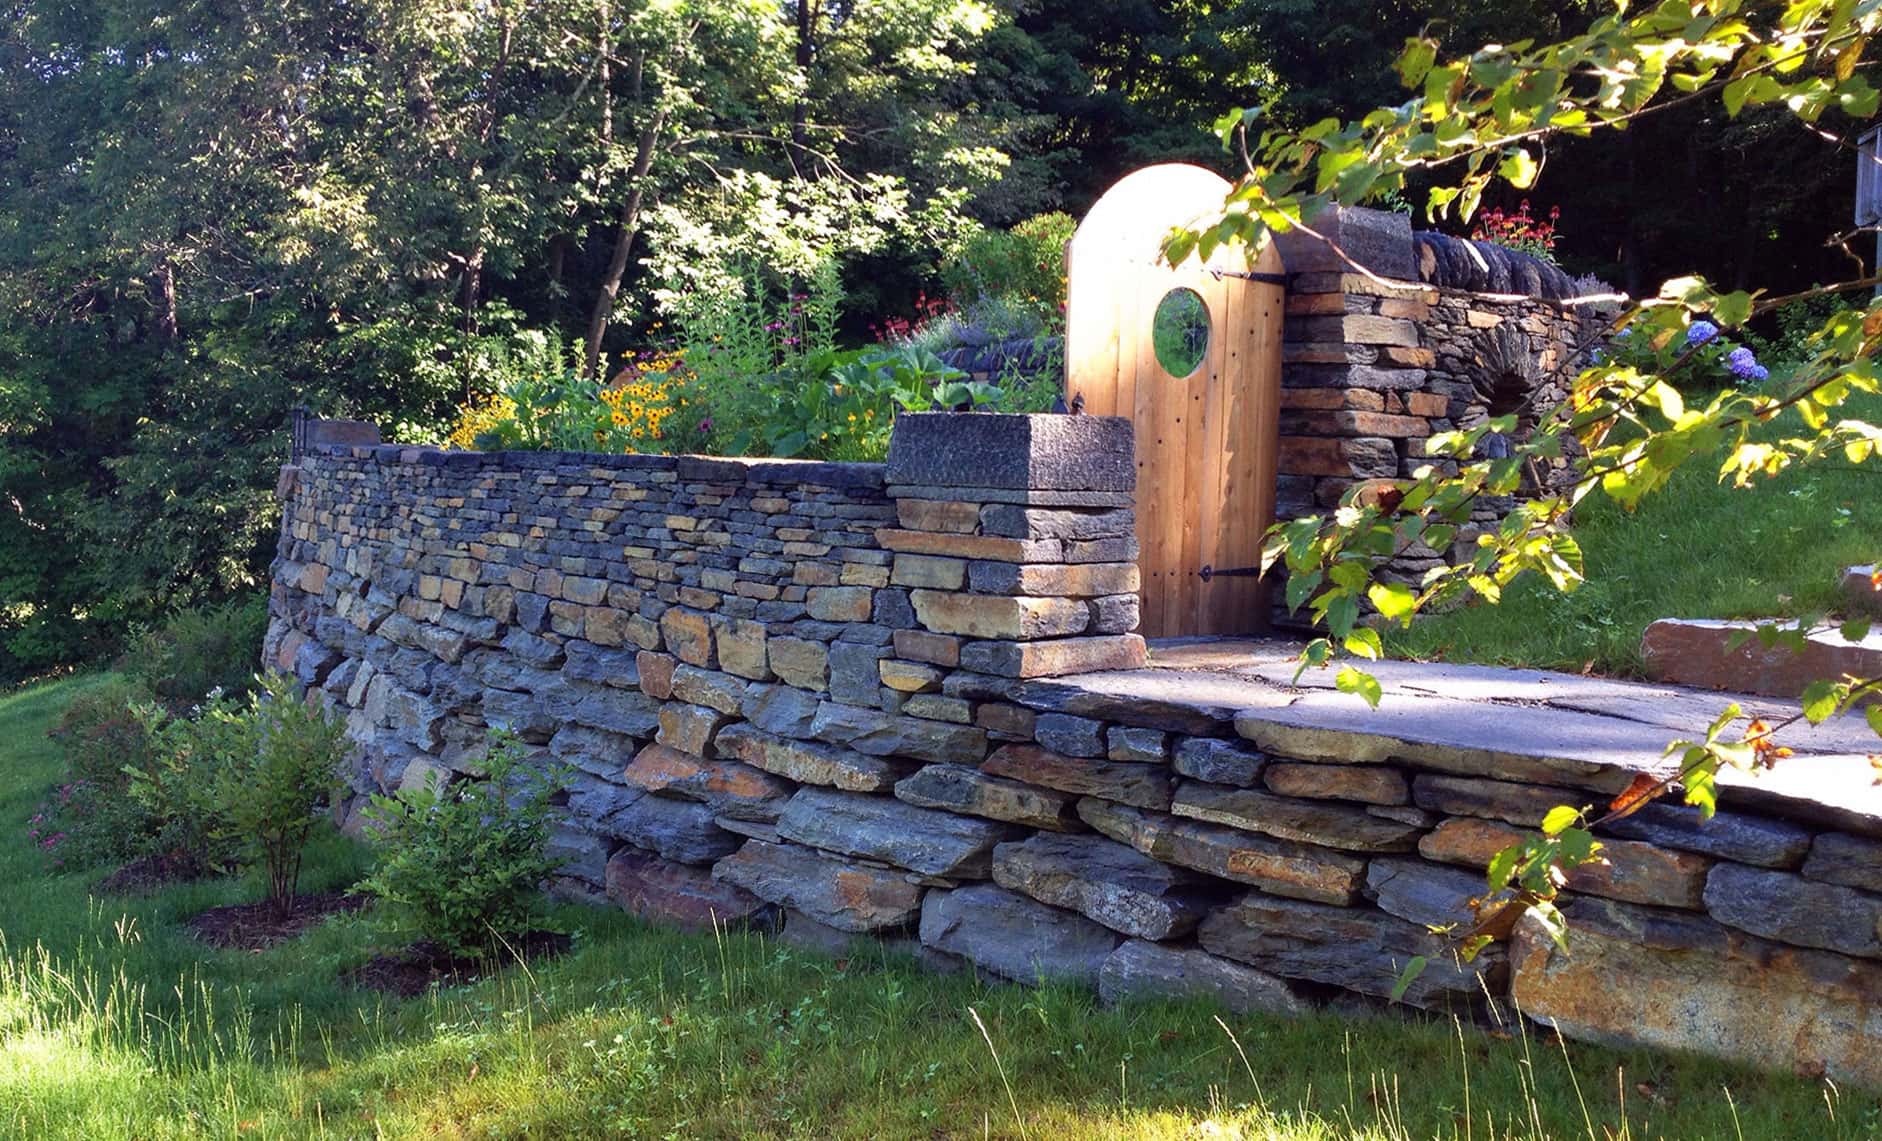 A special walled garden with custom stonework, gates and more.